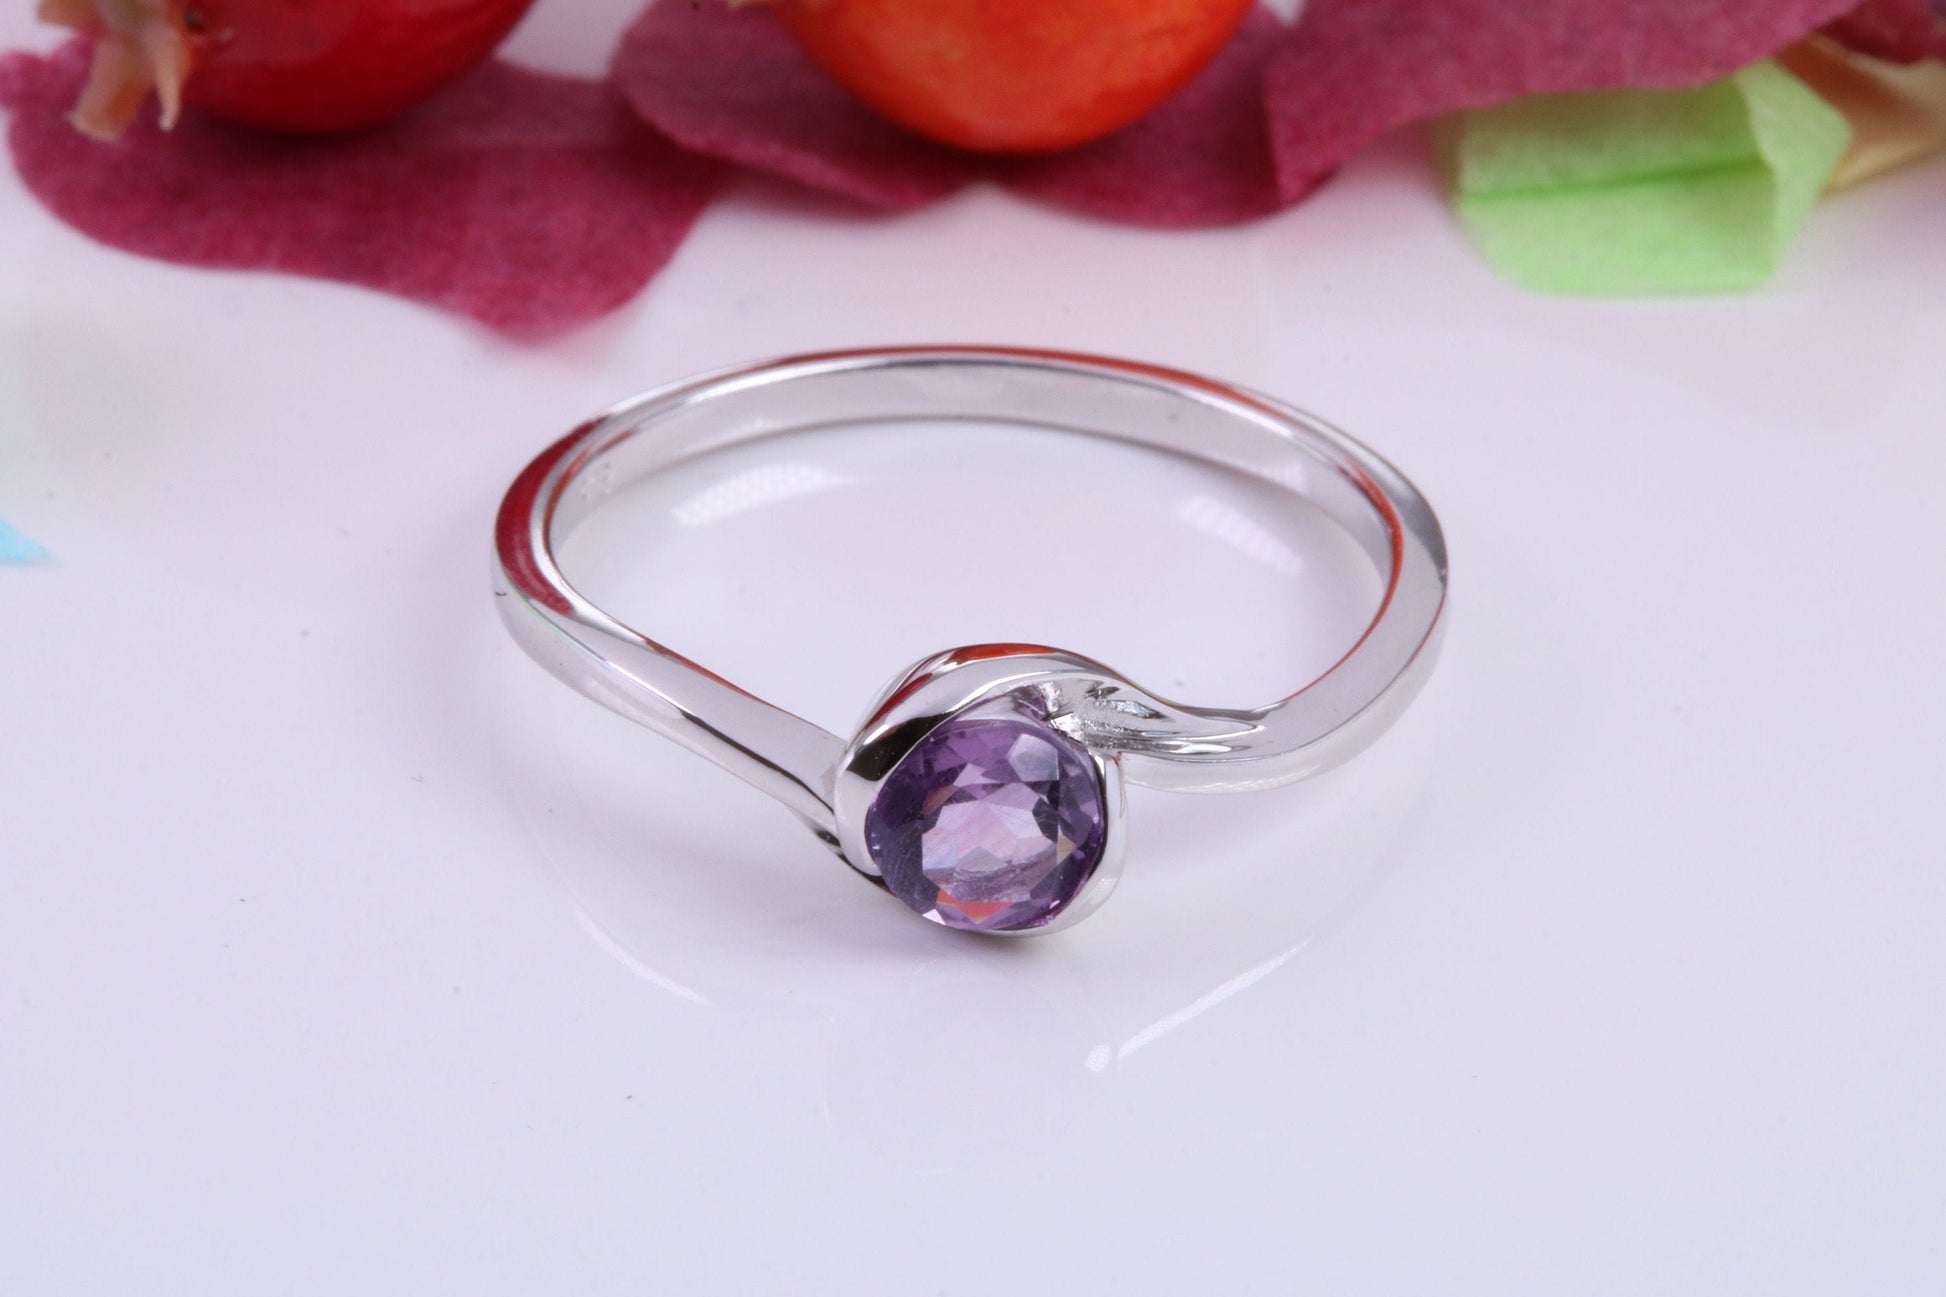 Natural Round cut Amethyst set Sterling Silver Ring, Very Smooth Setting, February Birthstone